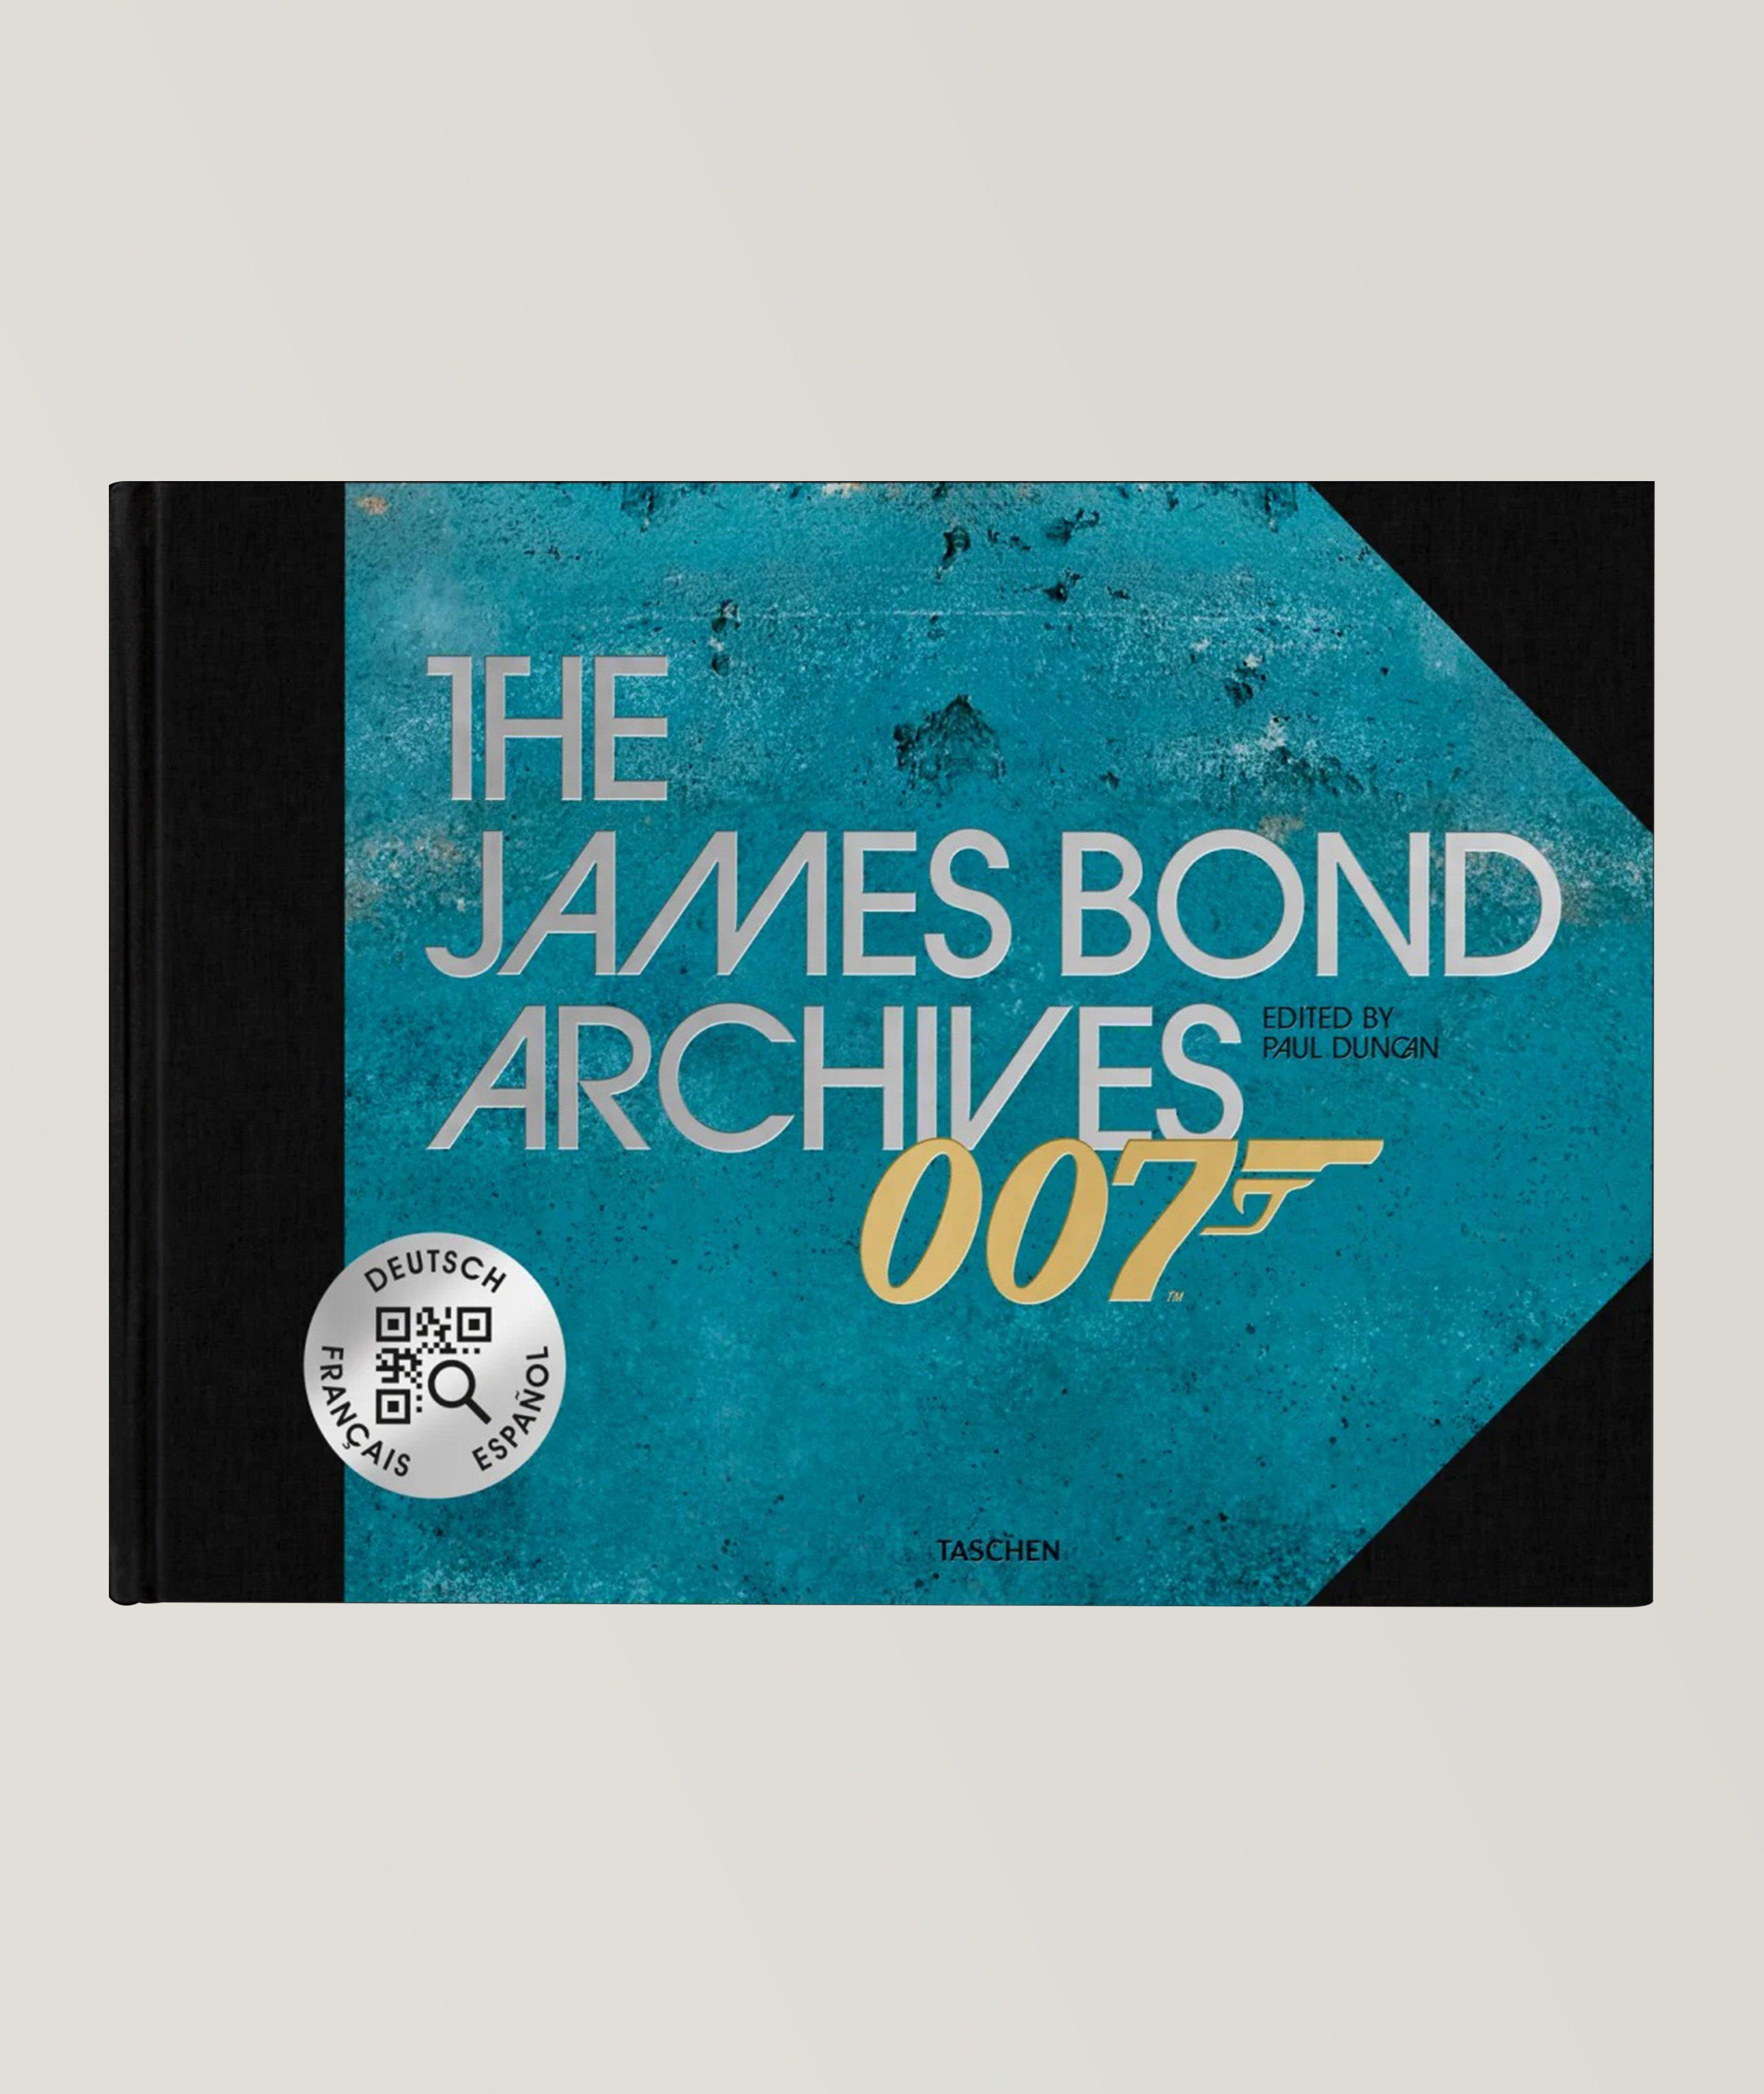 The James Bond Archives, “No Time To Die” Edition image 0